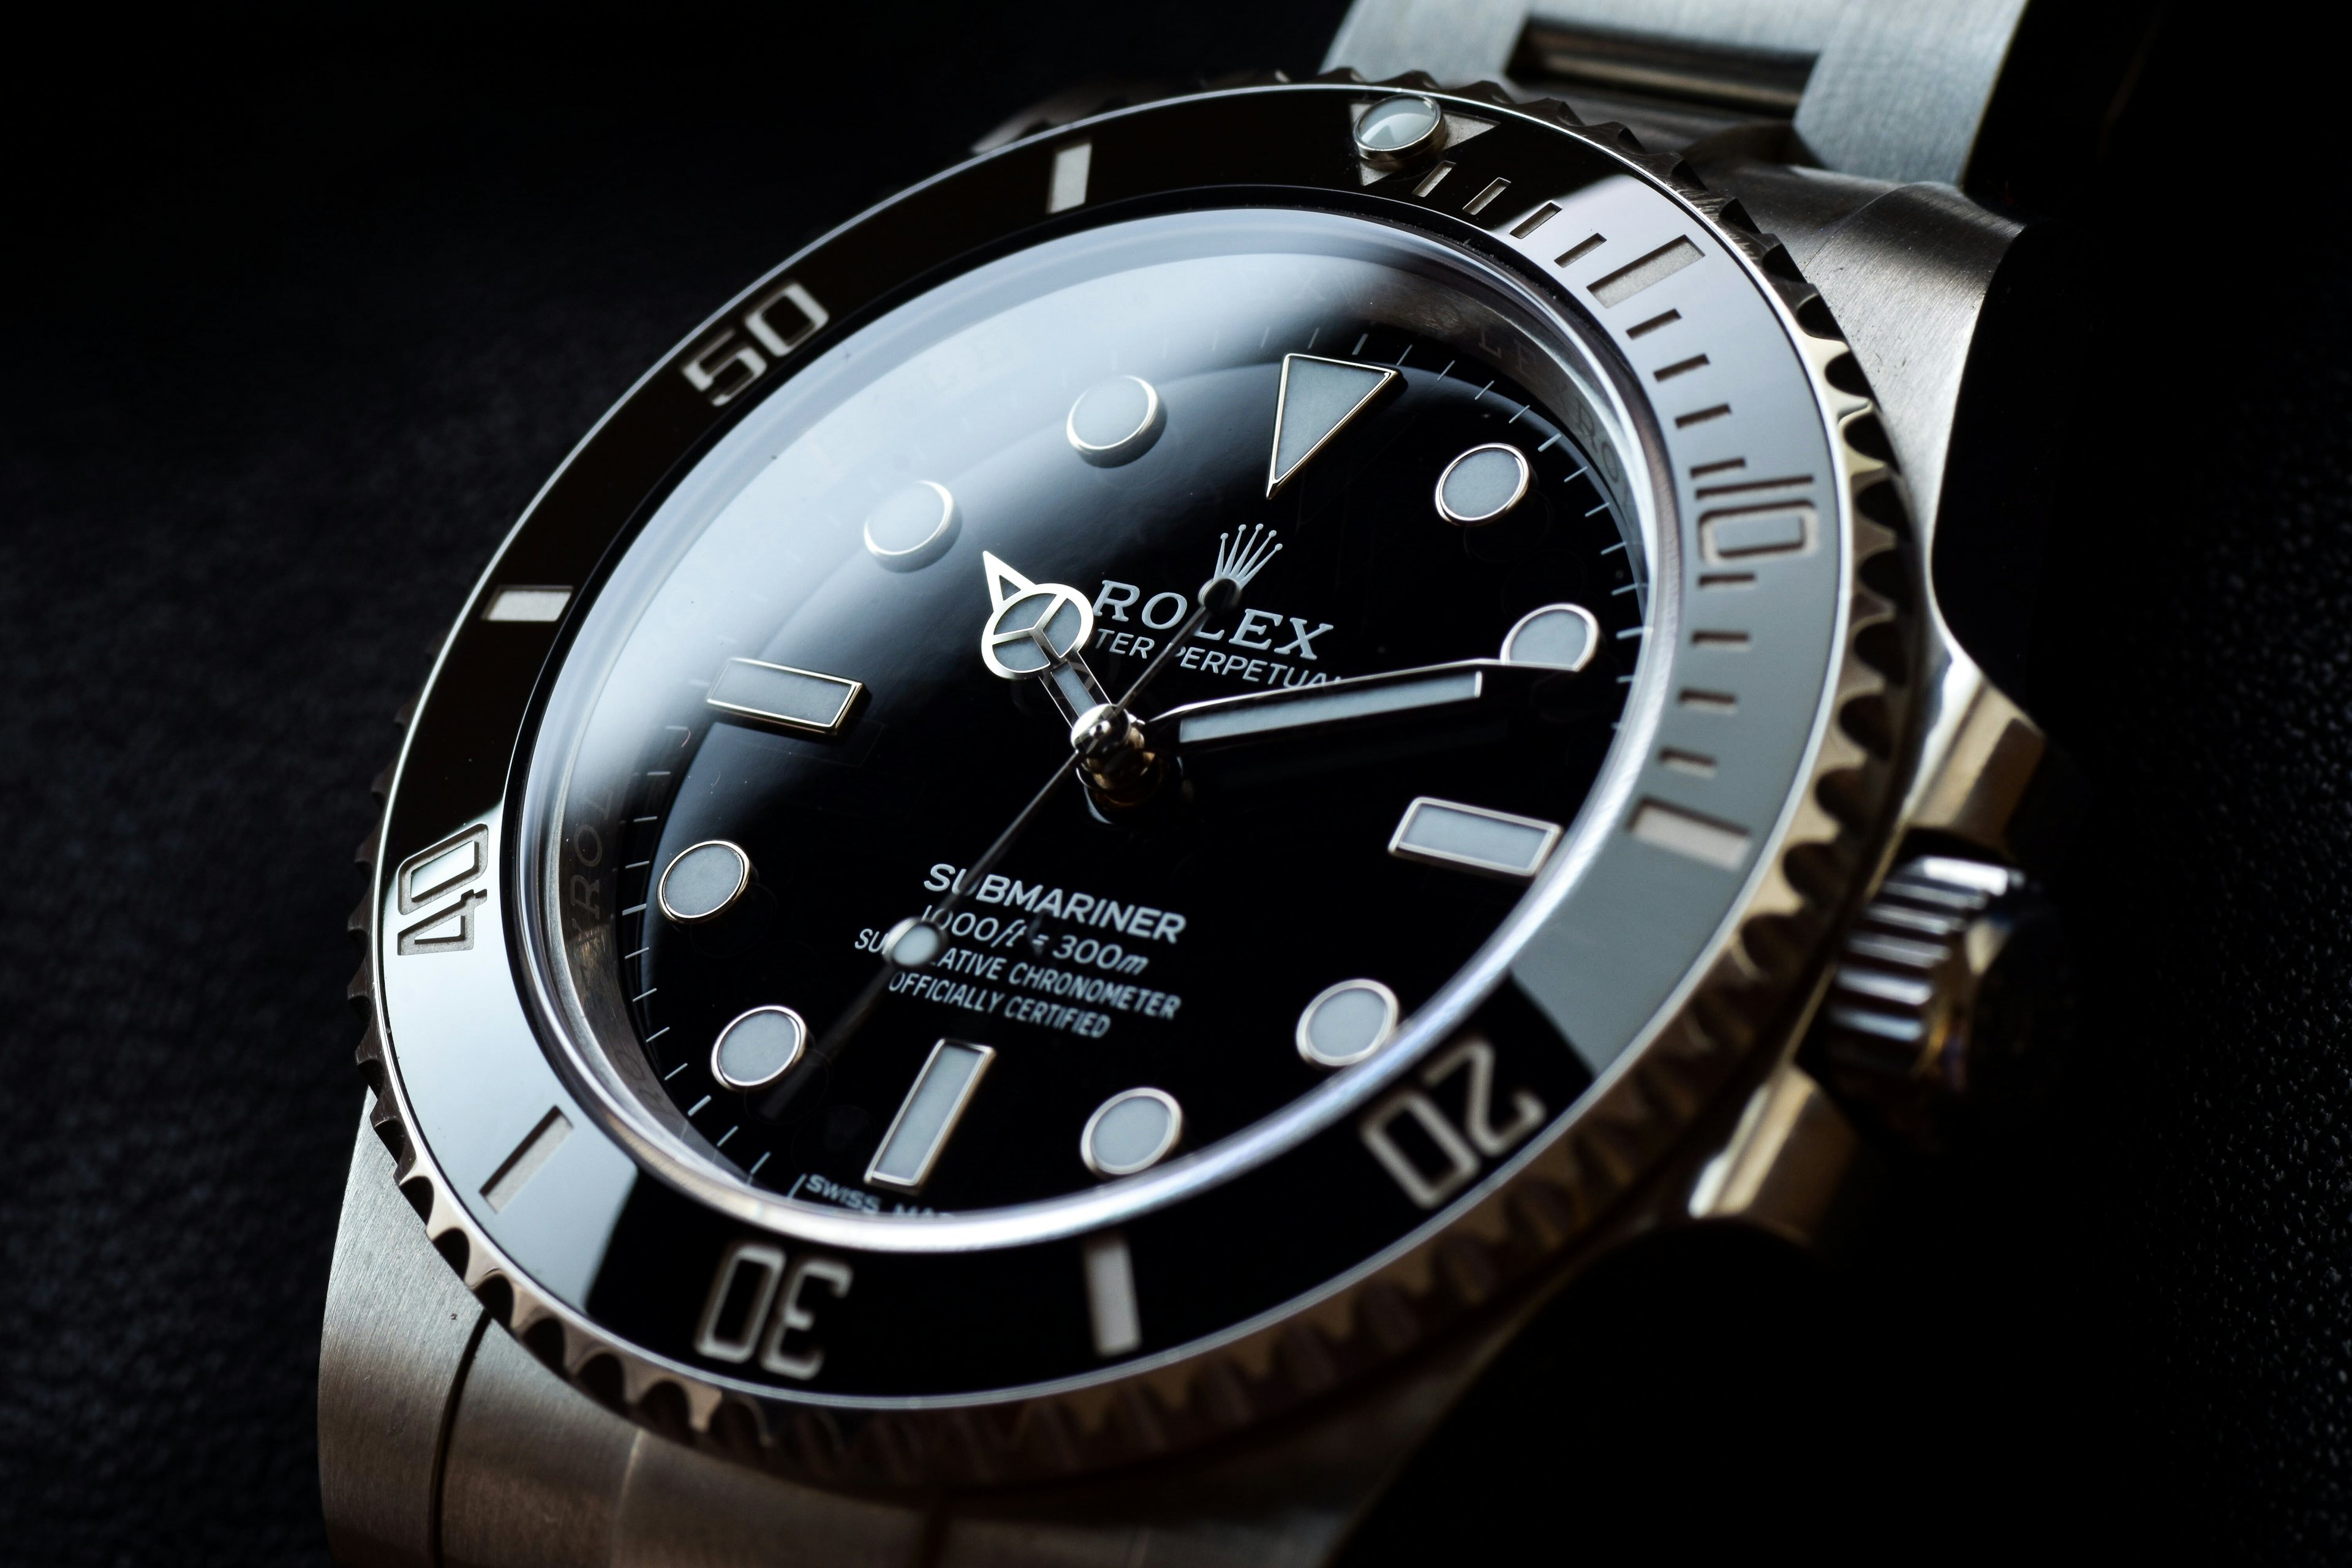 Rolex outperformed in the hard luxury category last year. Photo: Shutterstock